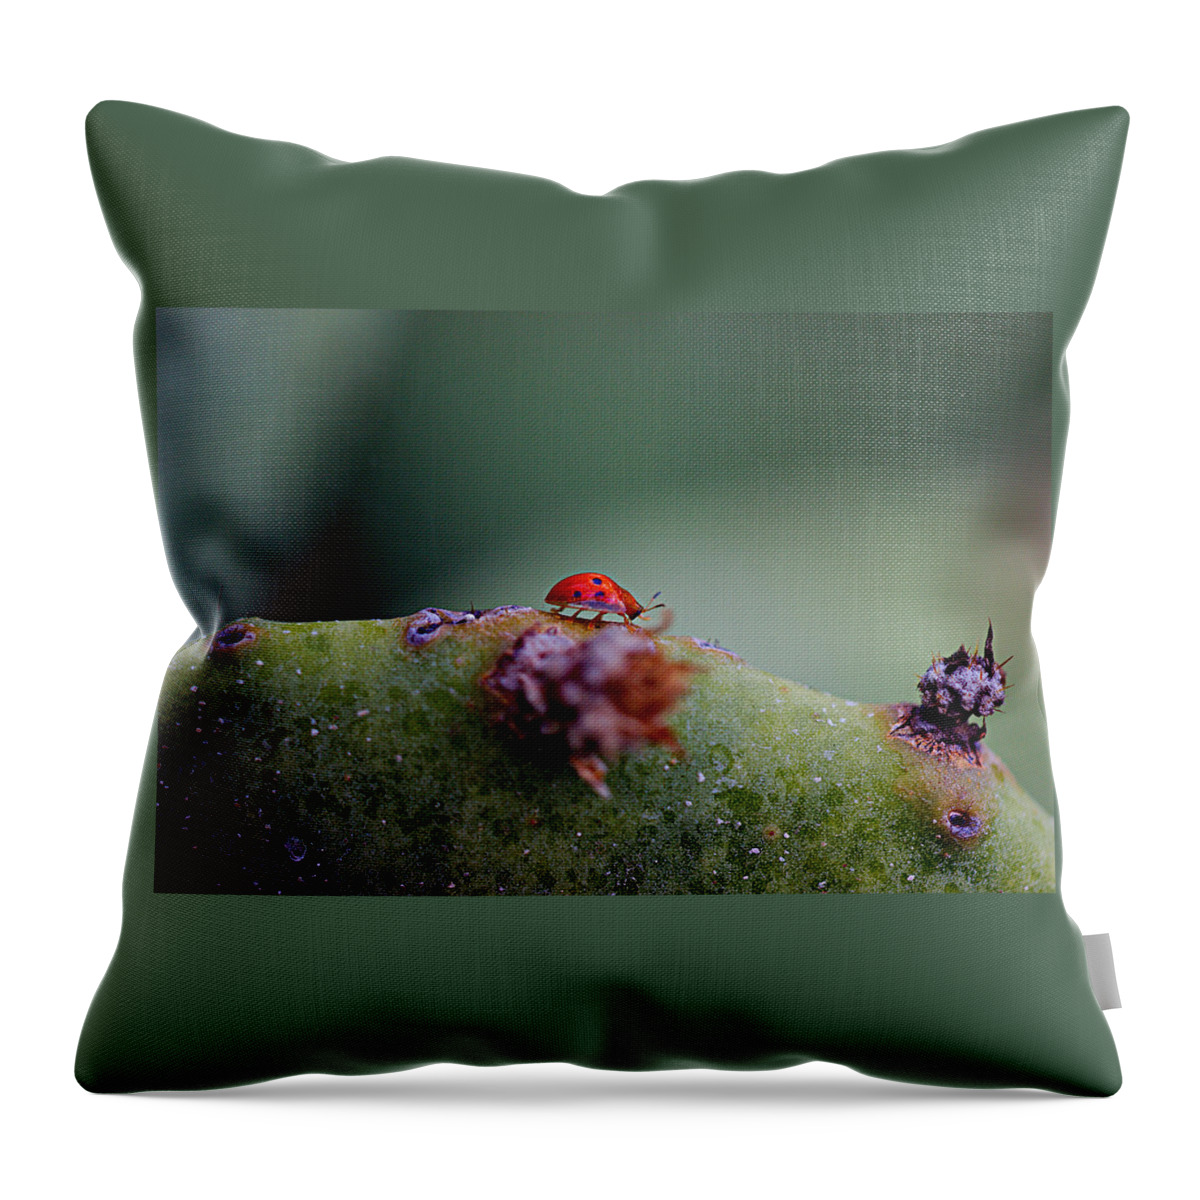 James Smullins Throw Pillow featuring the photograph Ladybug on Prickly pear cactus by James Smullins